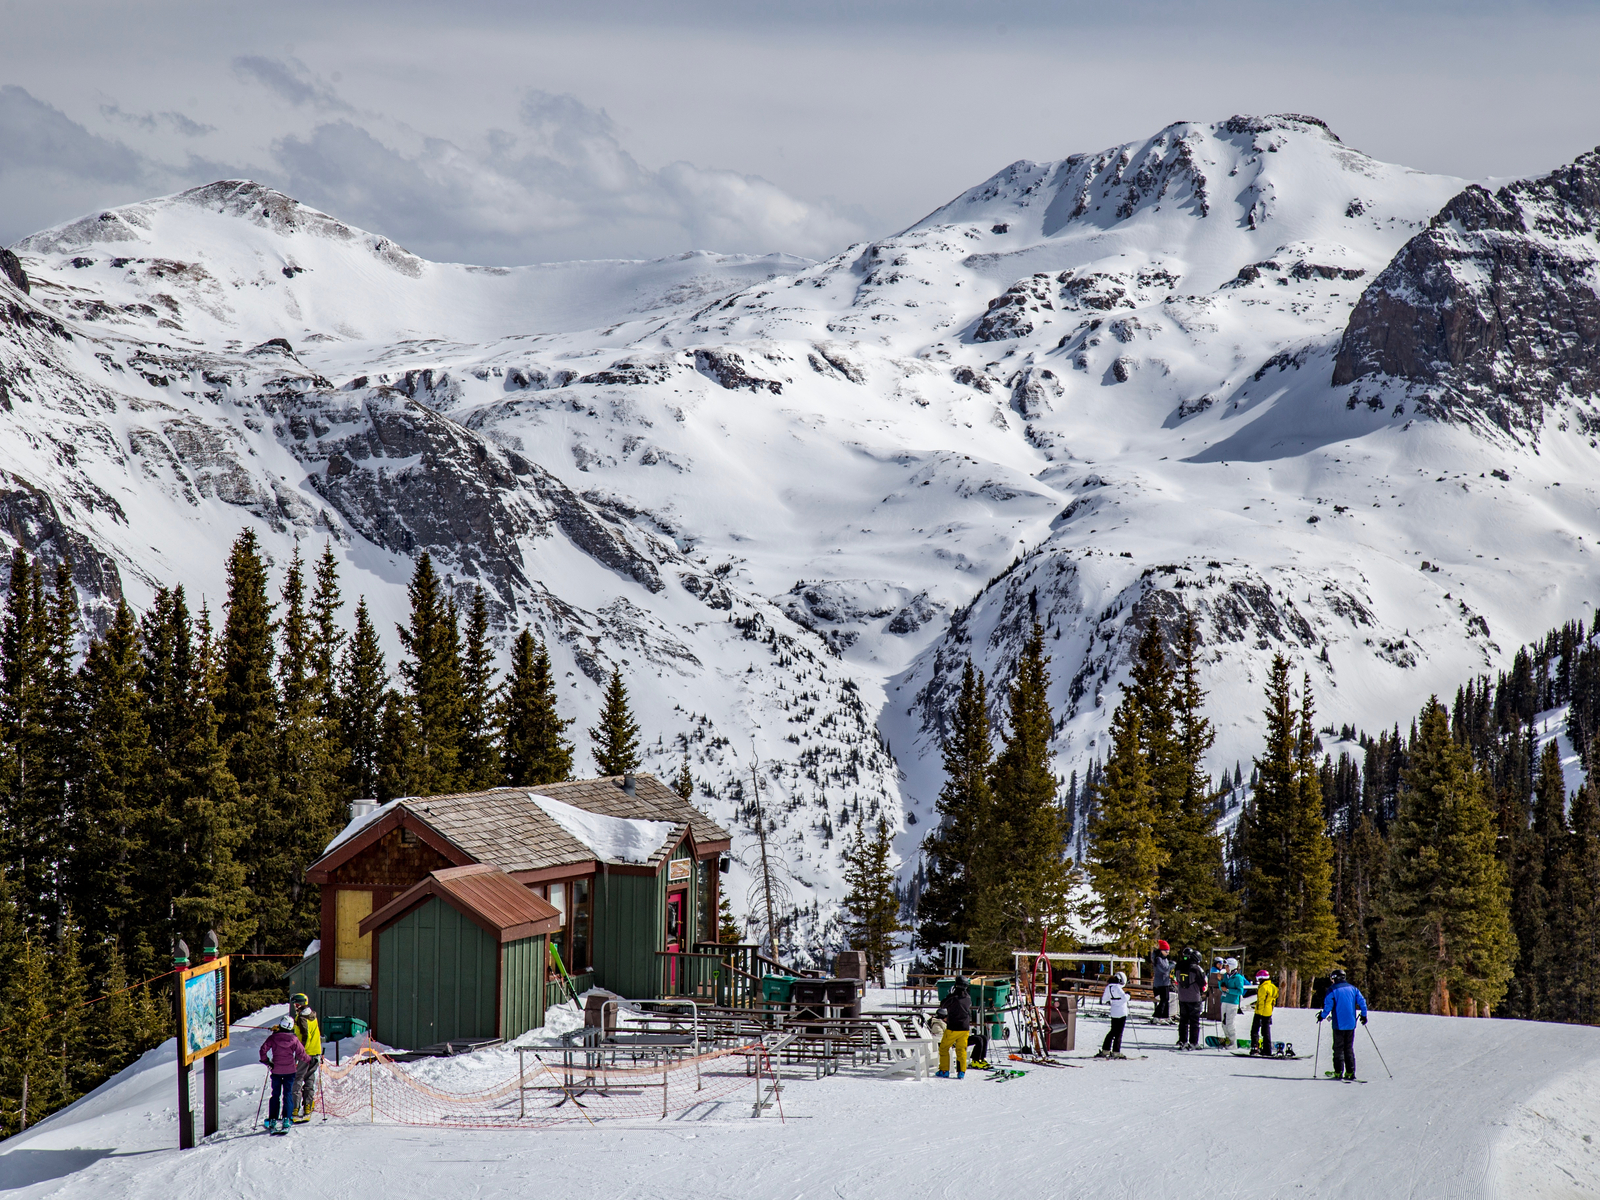 Several skiers fronting a cabin and a rest area of one of the best ski resorts near Denver, Telluride Ski Resort